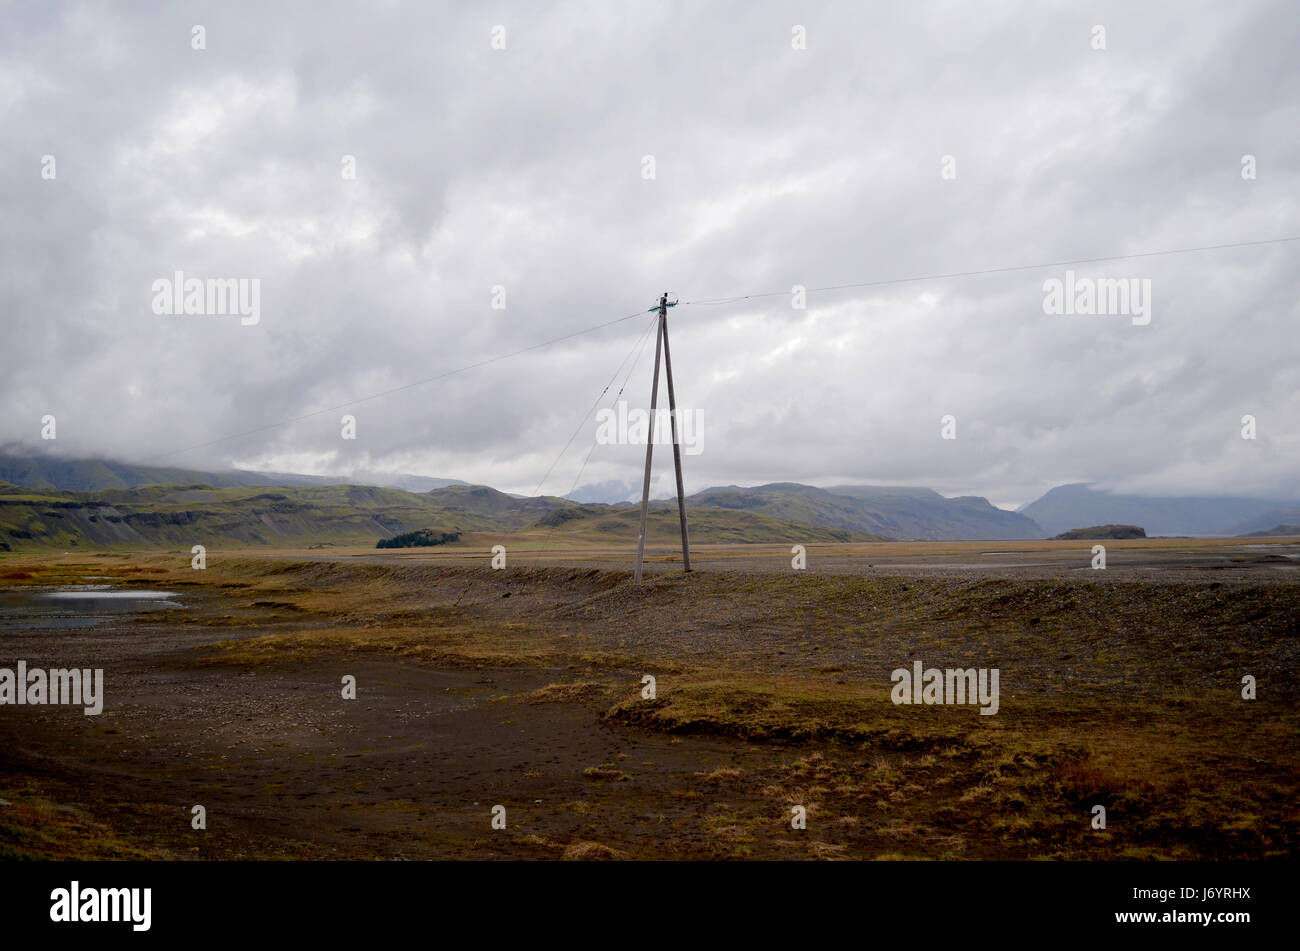 Power line in rural landscape, Iceland Stock Photo